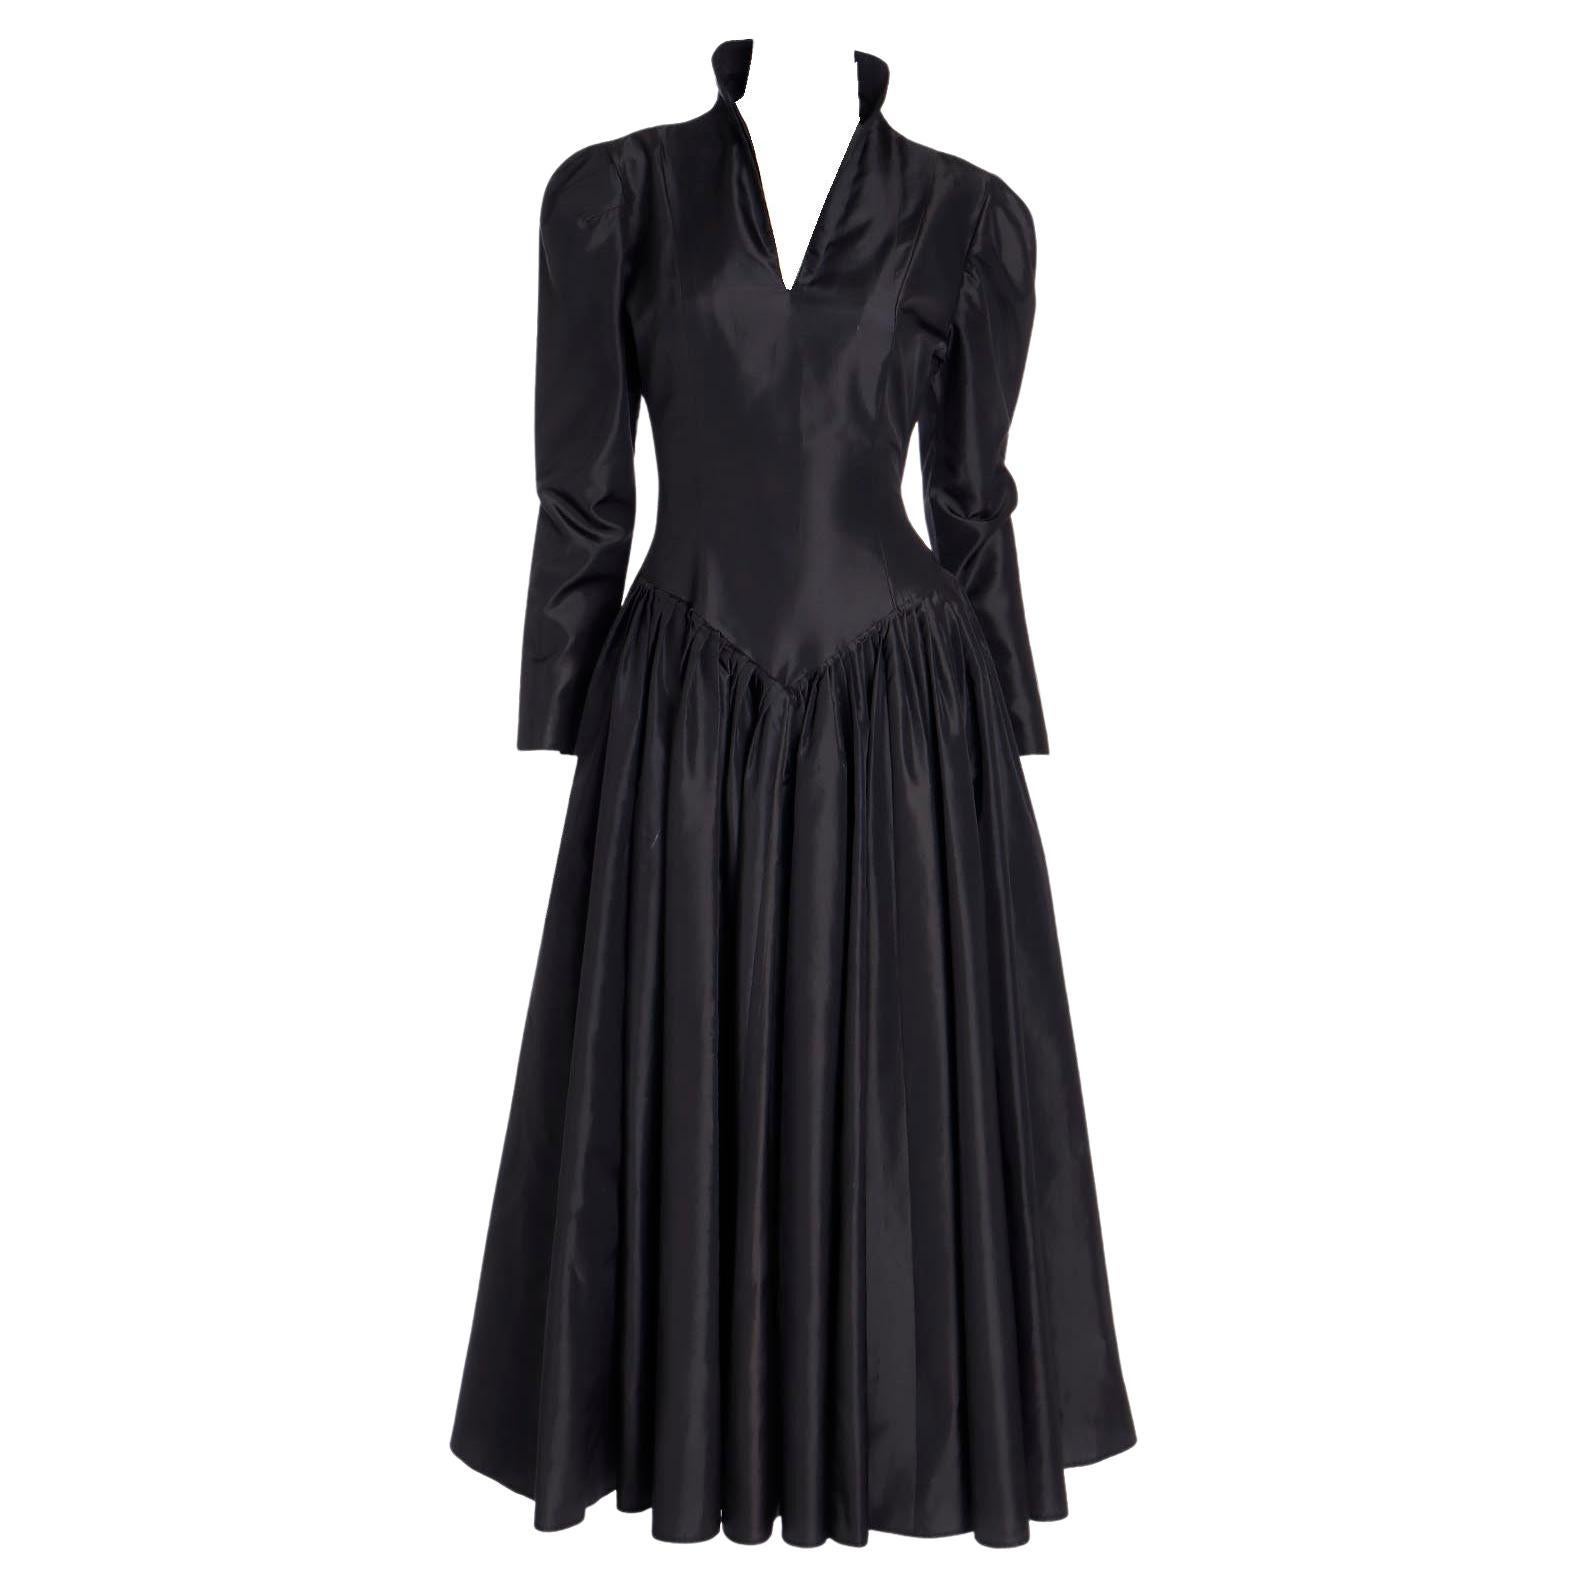 1980s Norma Kamali Victorian Inspired Black Dress For Sale